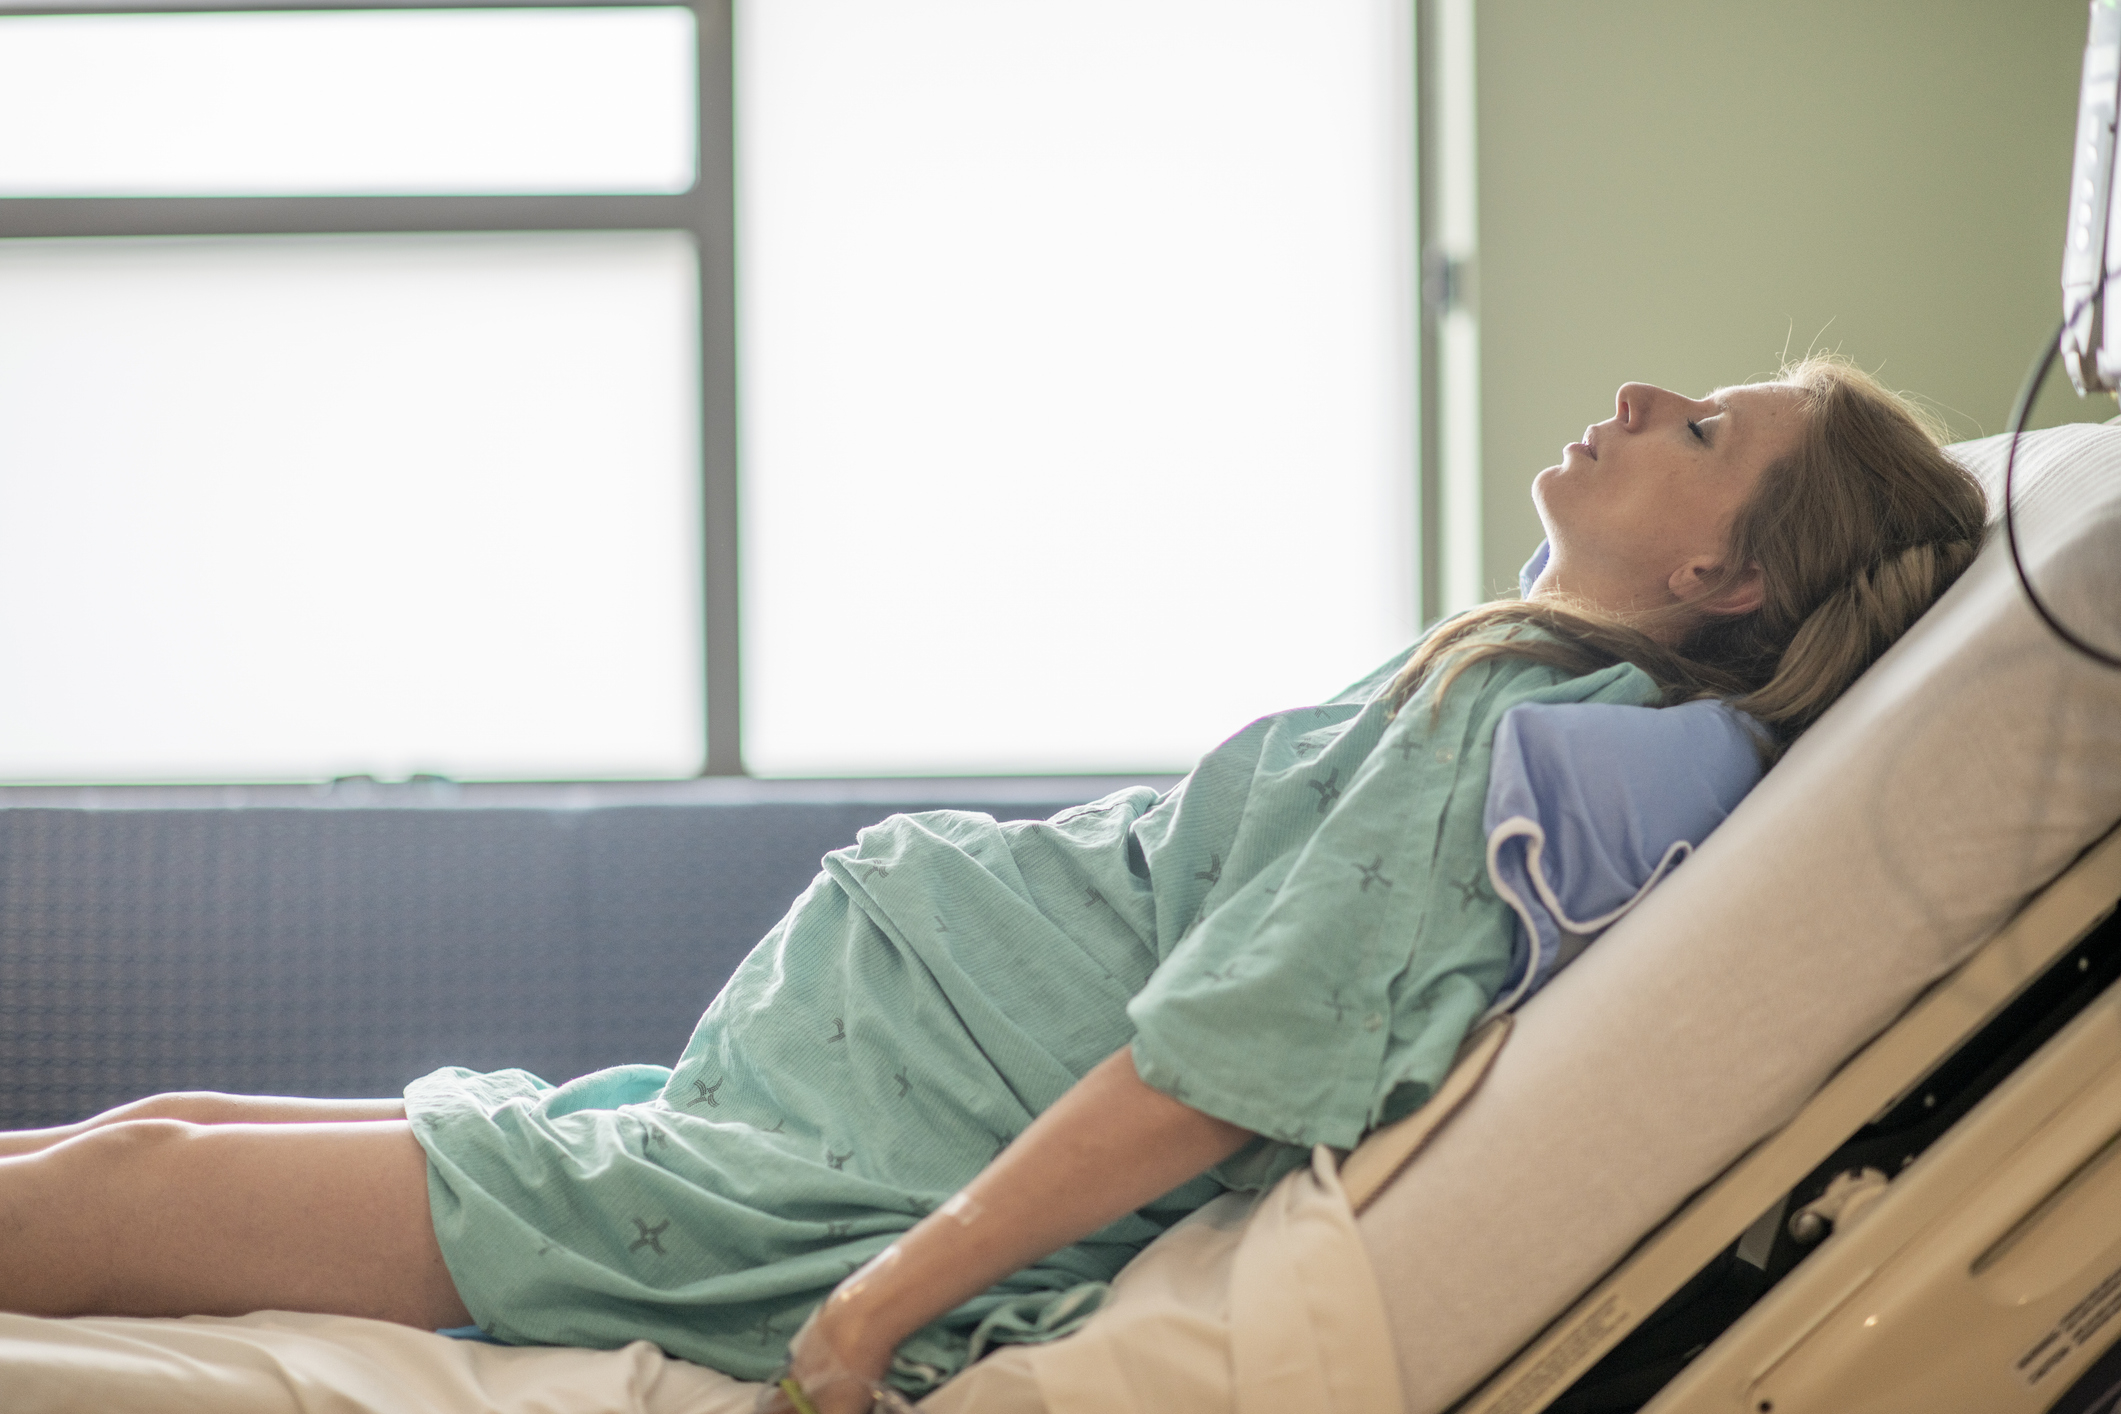 Expectant parent resting on a hospital bed, looking thoughtful